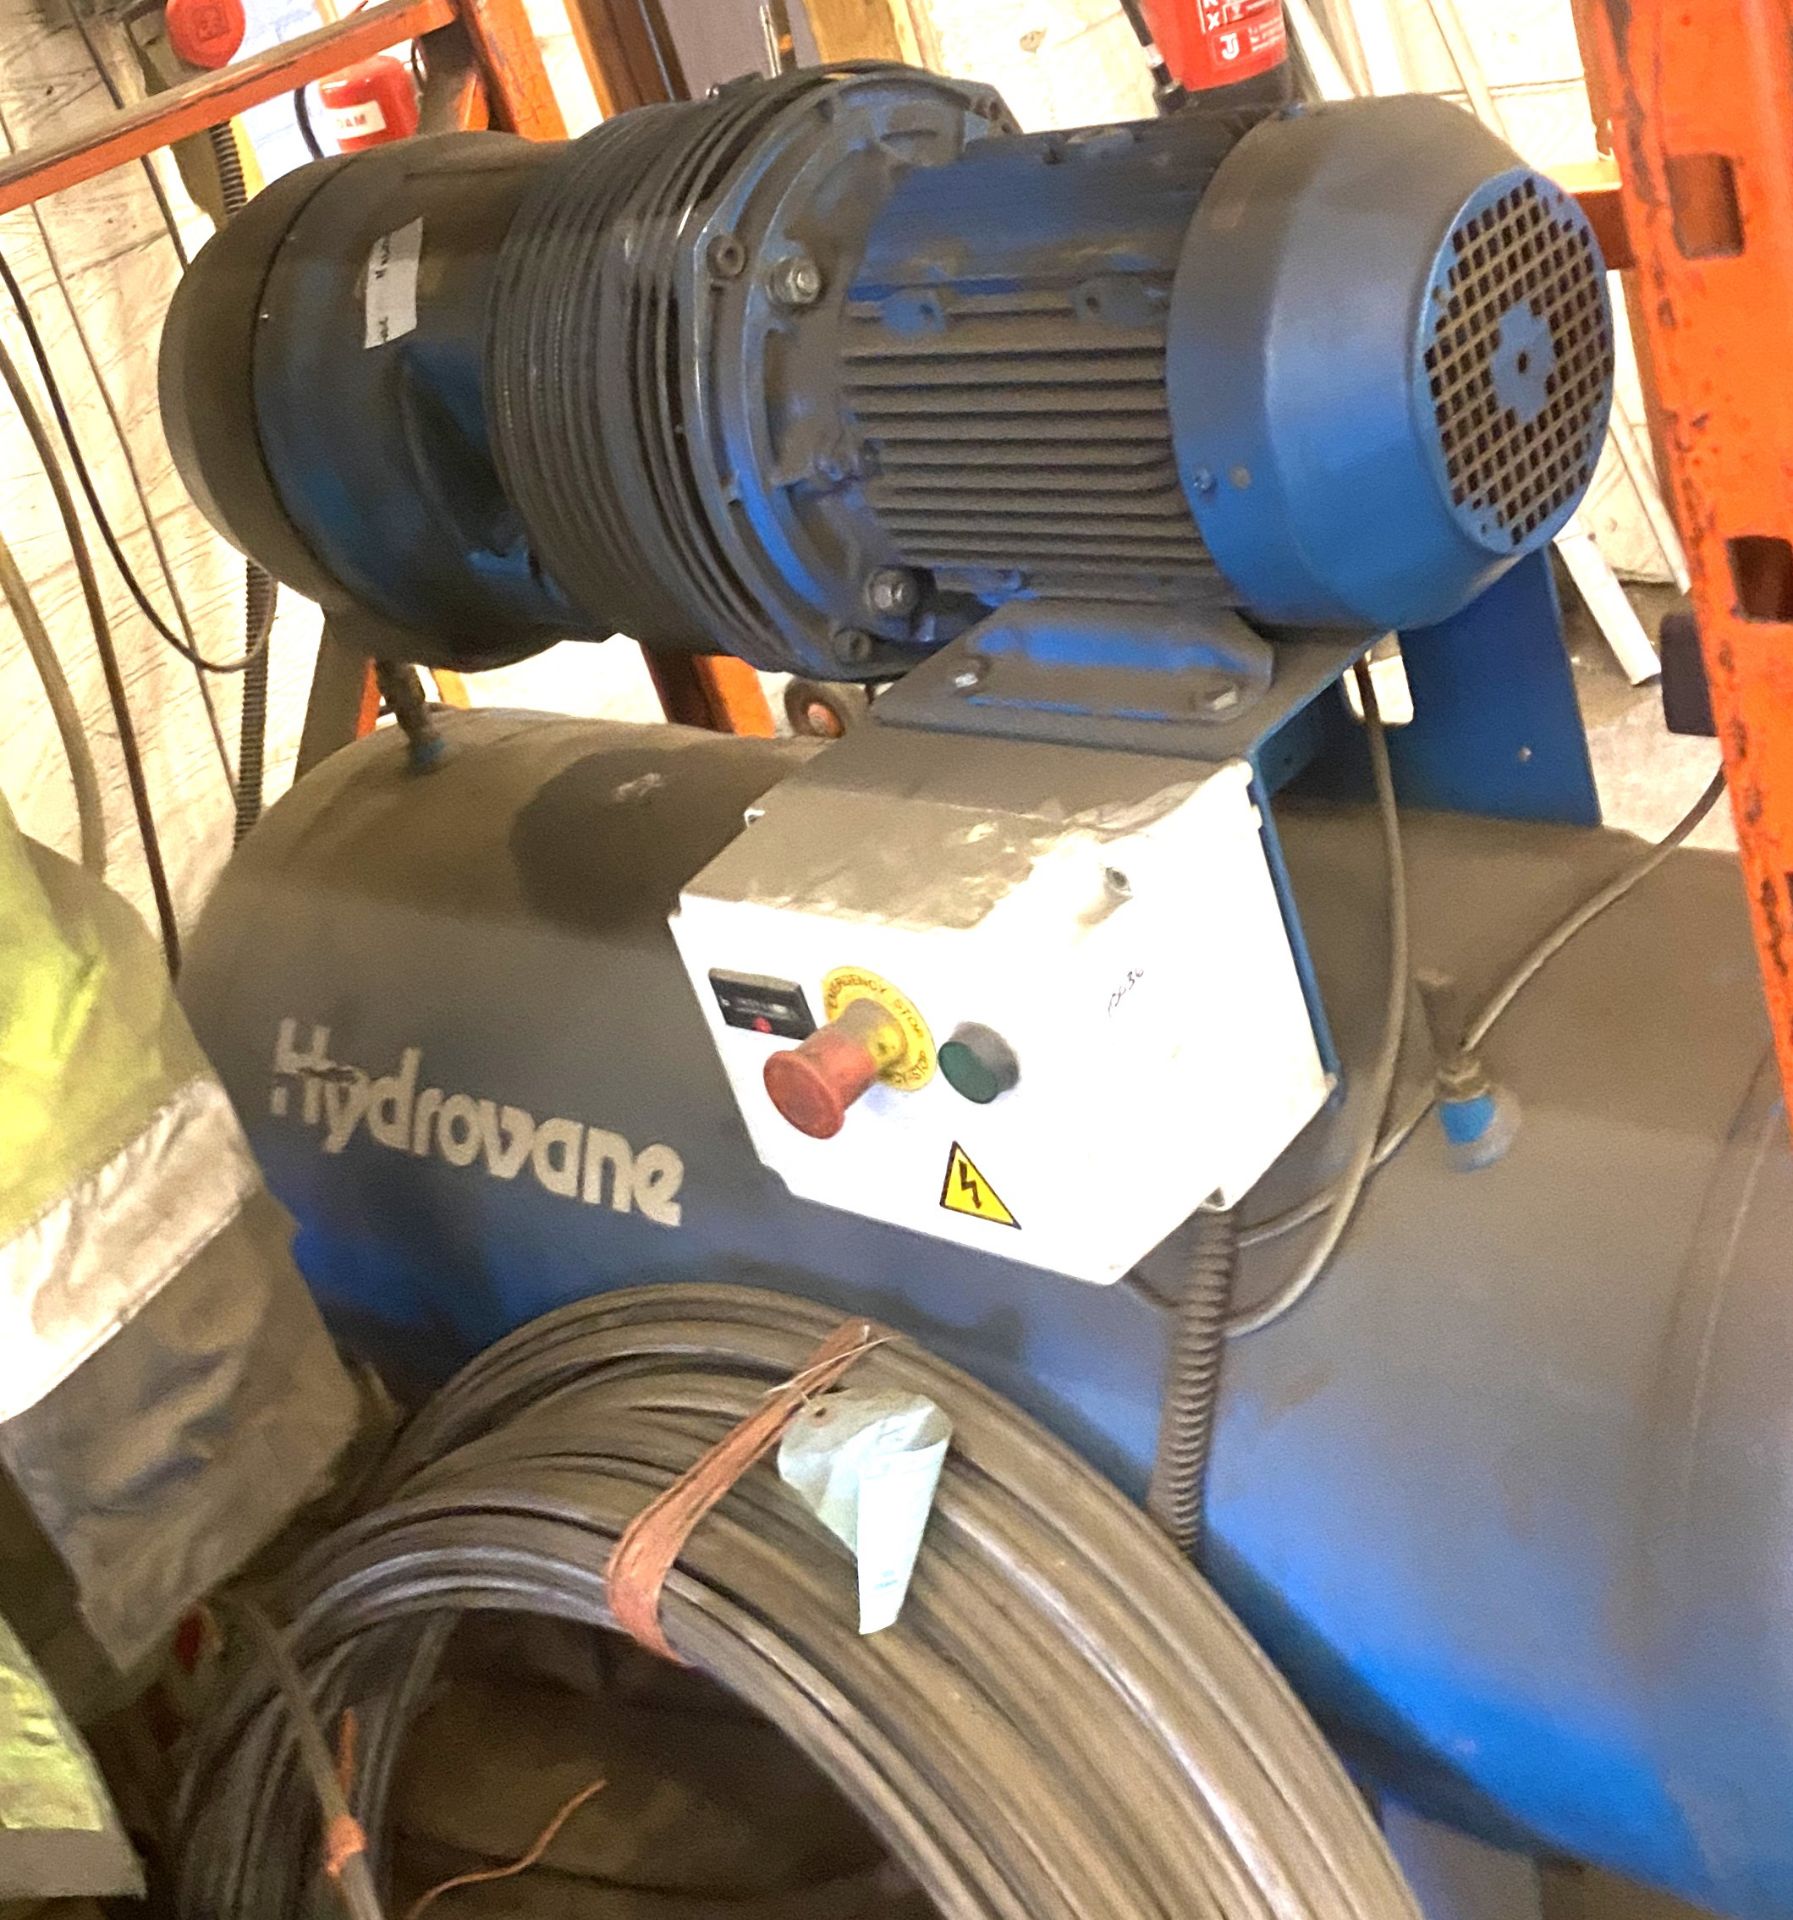 1 x Hydrovane Industrial Air Compressor With a Compair F9S Refrigerant Dryer